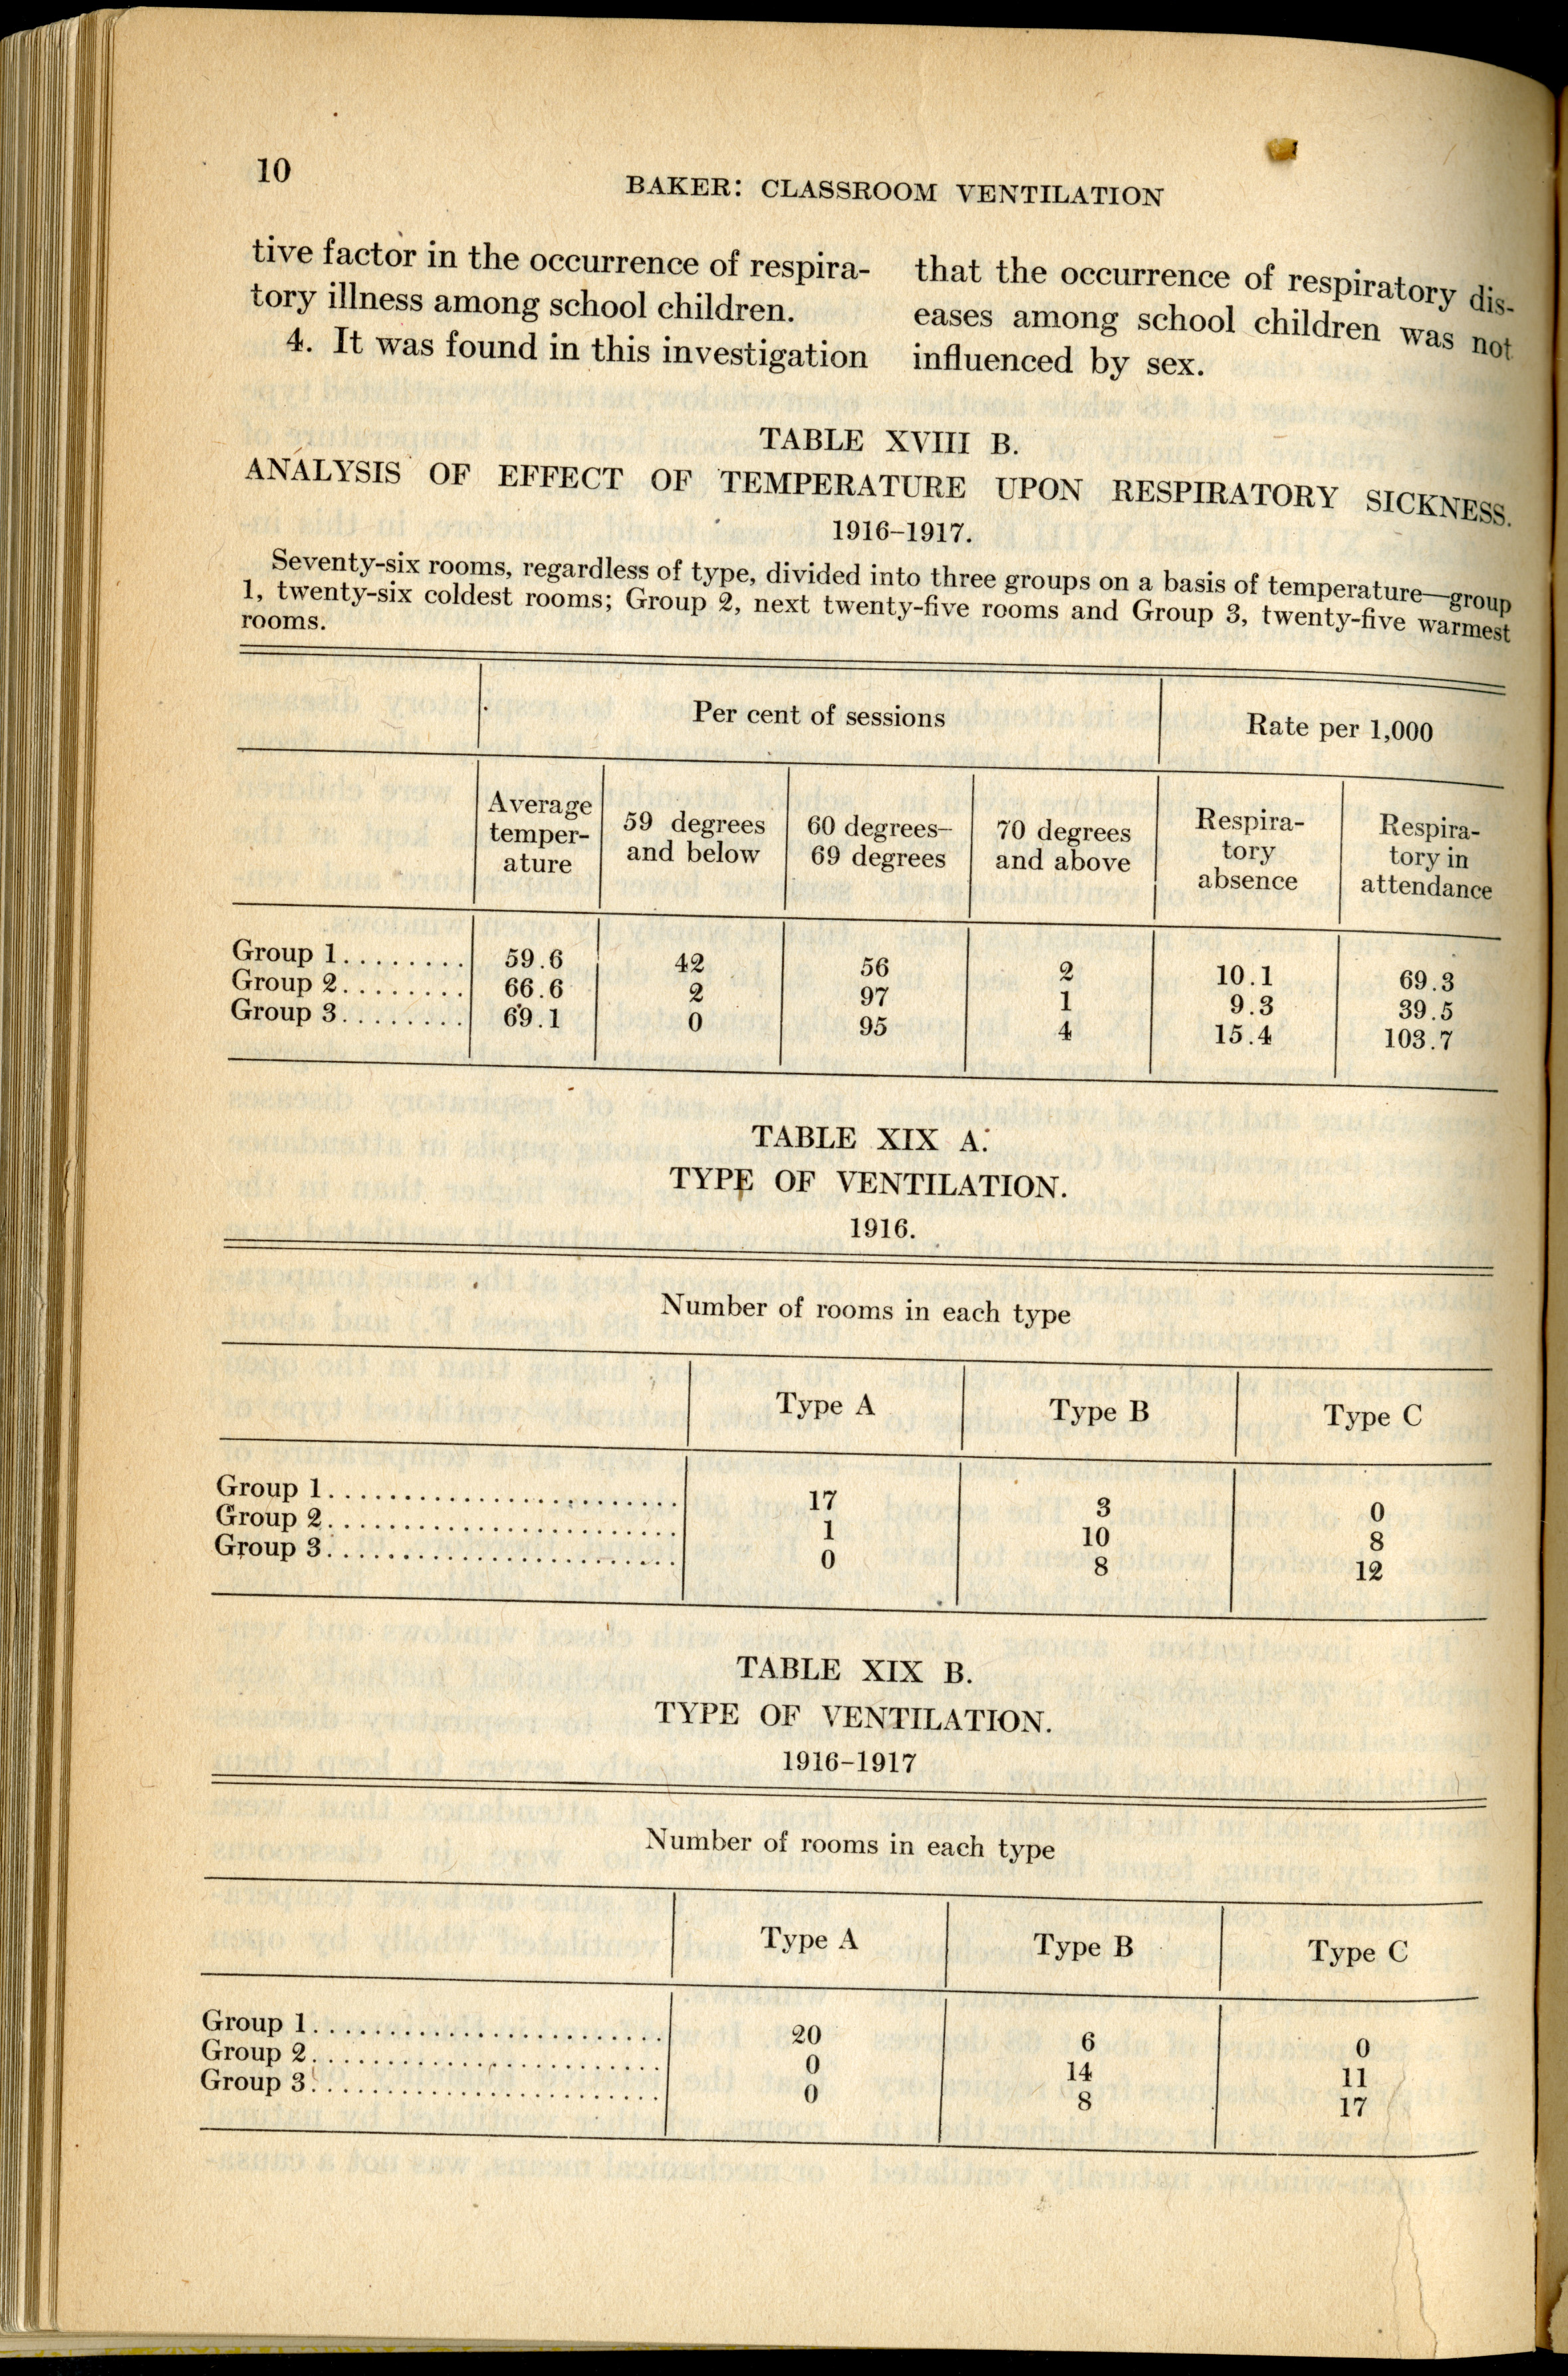 Table showing an analysis of the effect of temperature upon respiratory sickness, 1916-1917.